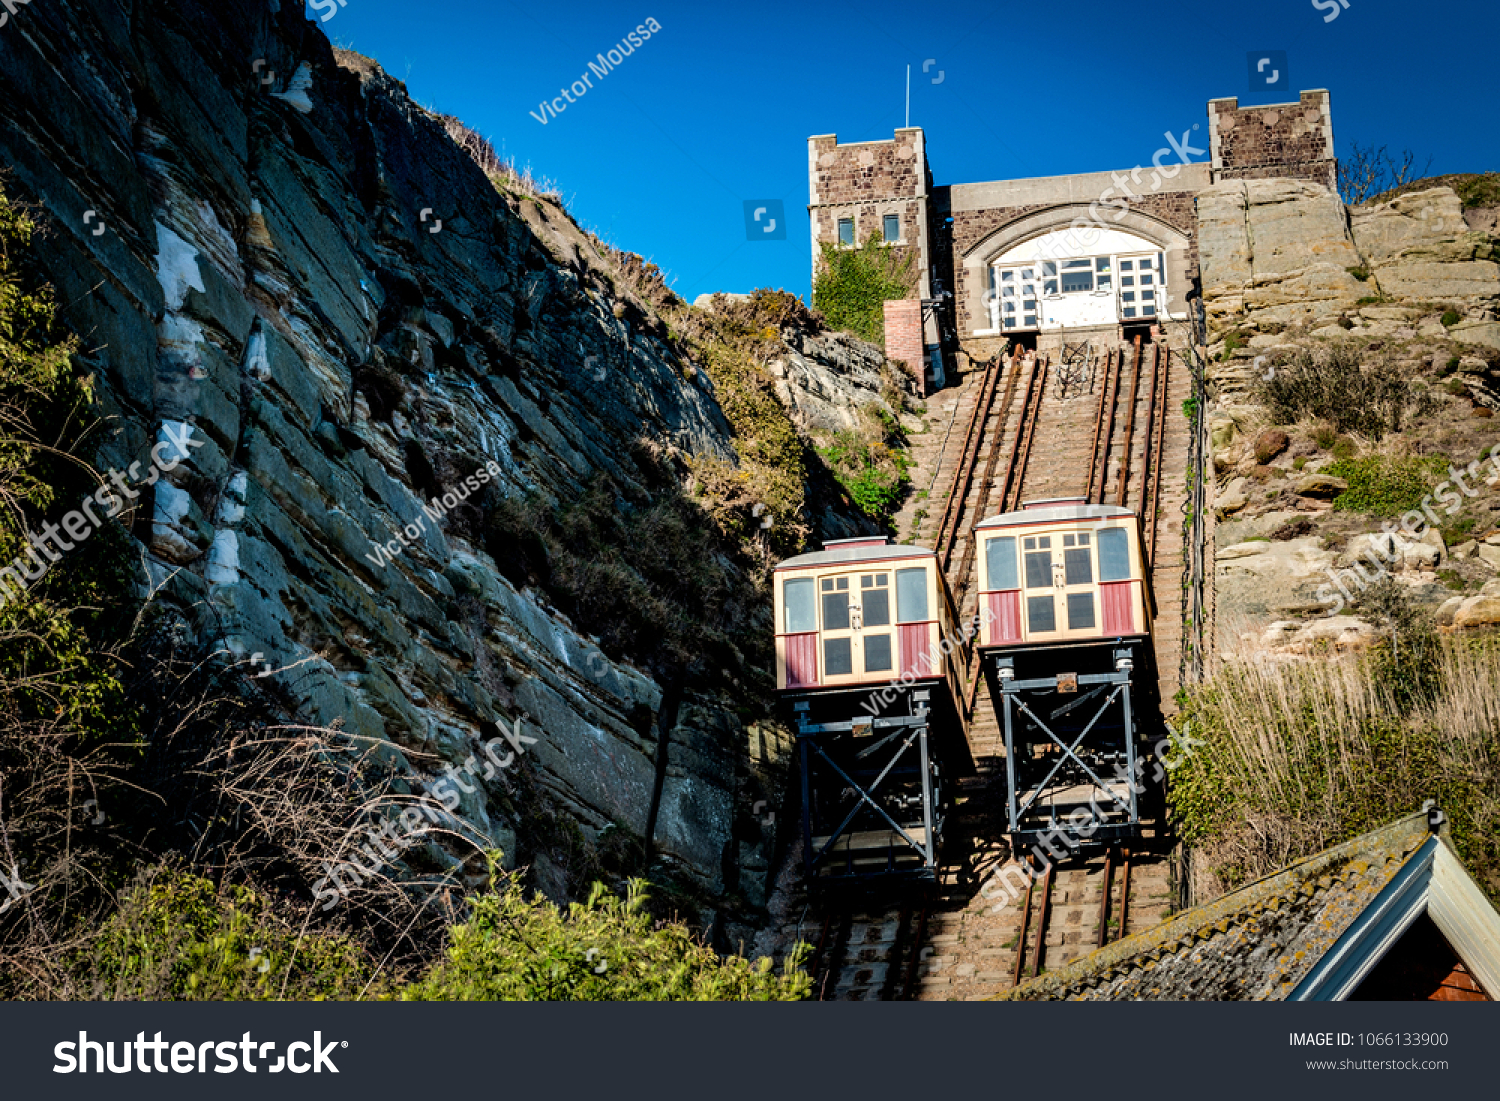 East Hill Cliff Railway or lift is a funicular railway located in the english town of Hastings in Sussex. A funicular is cable car operated by cable with ascending and descending cars counterbalanced #1066133900